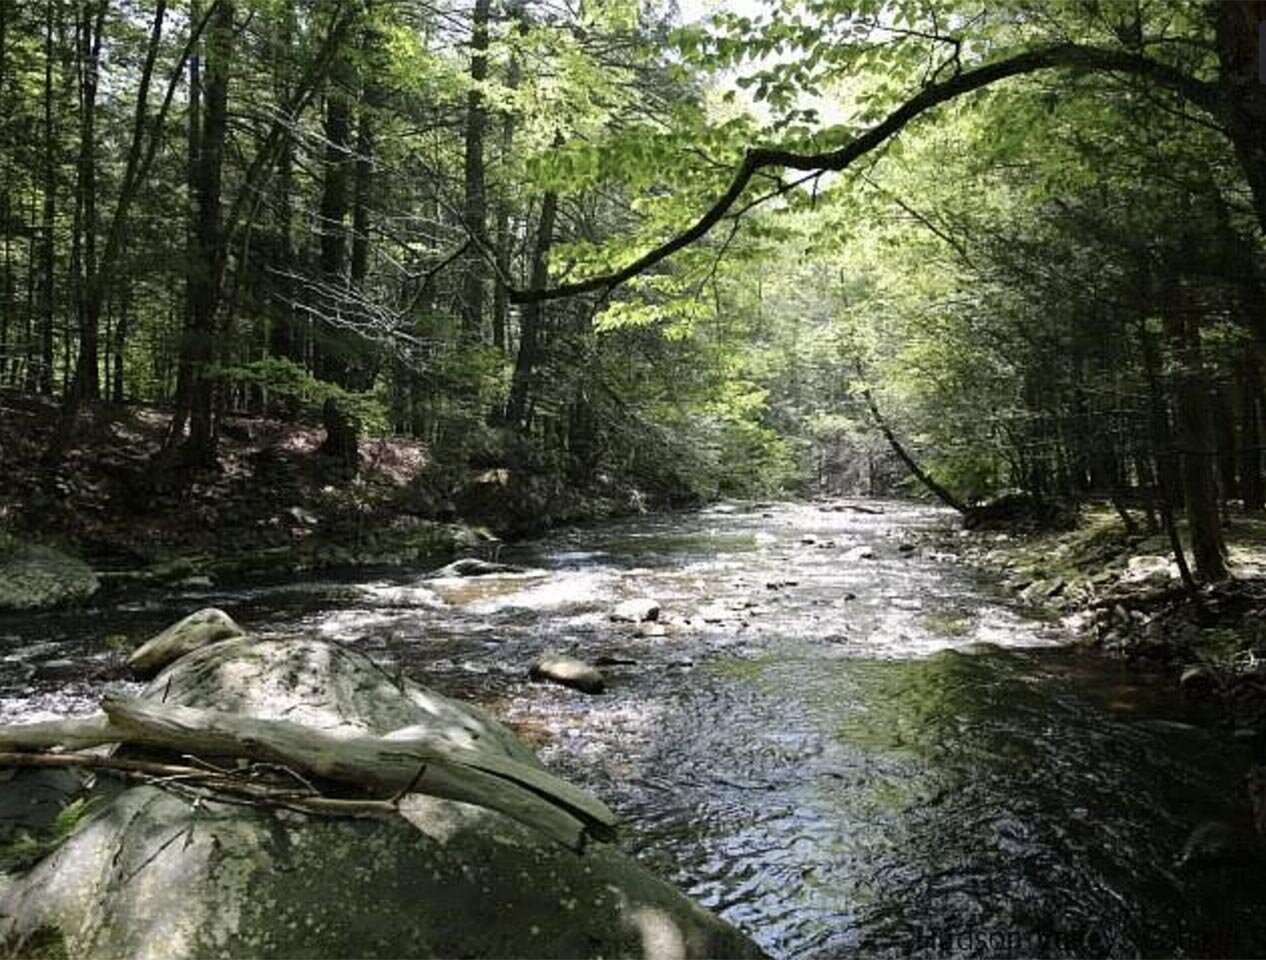 Daytime view of a river in the Catskills, with a canopy of leaves overhead.